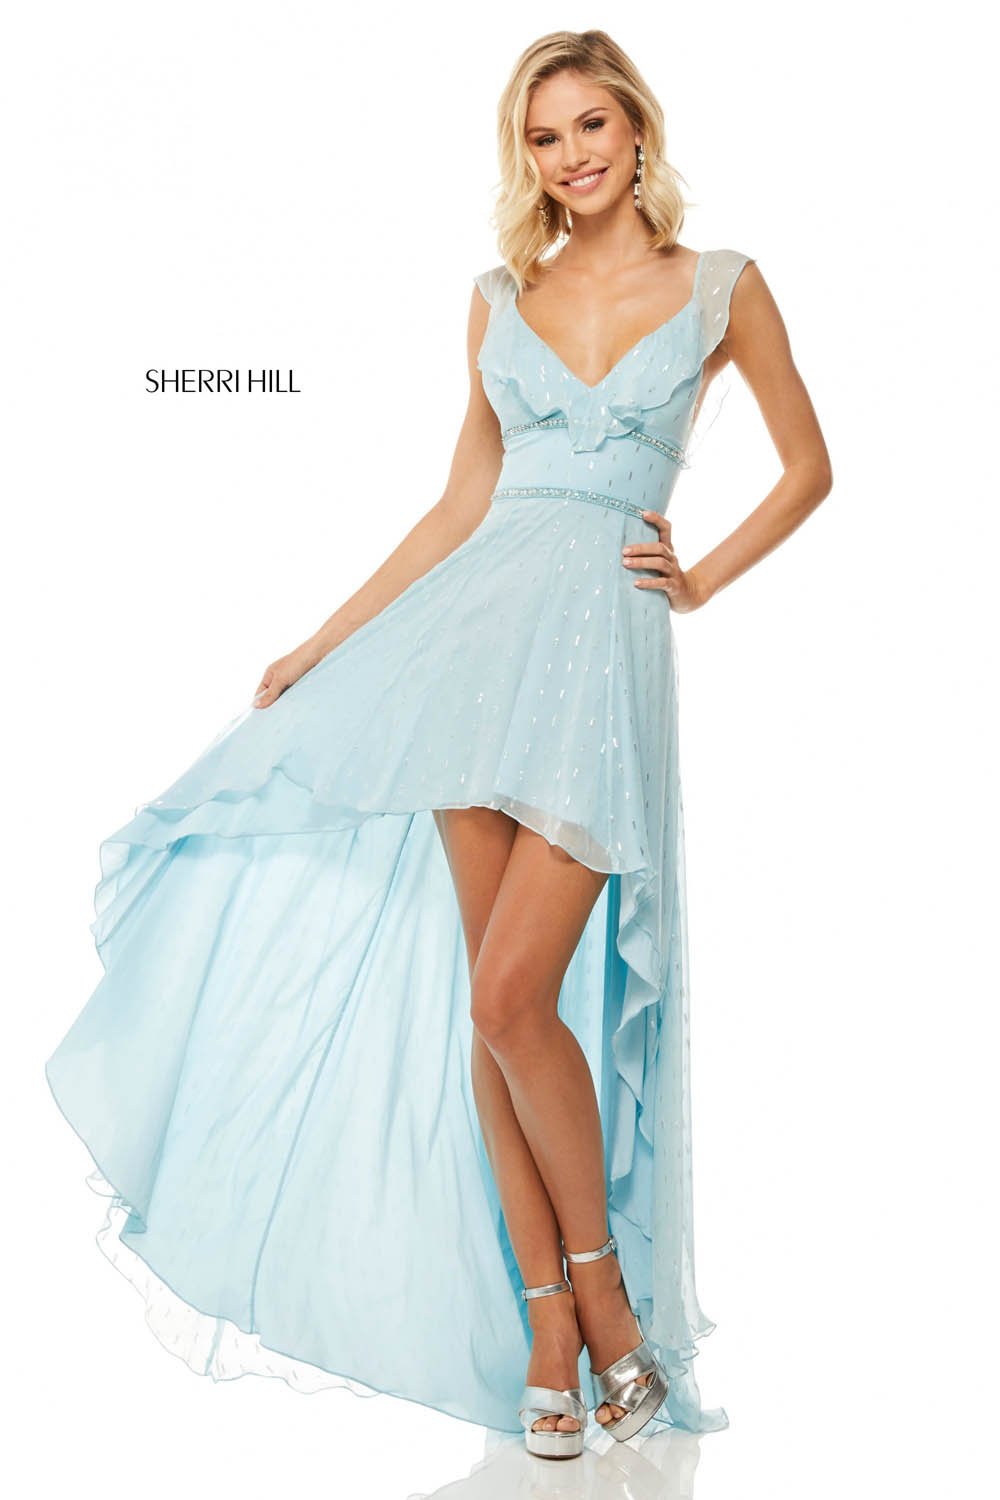 Sherri Hill 52799 dress images in these colors: Light Pink, Lilac, Light Blue, Ivory, Black, Light Yellow.